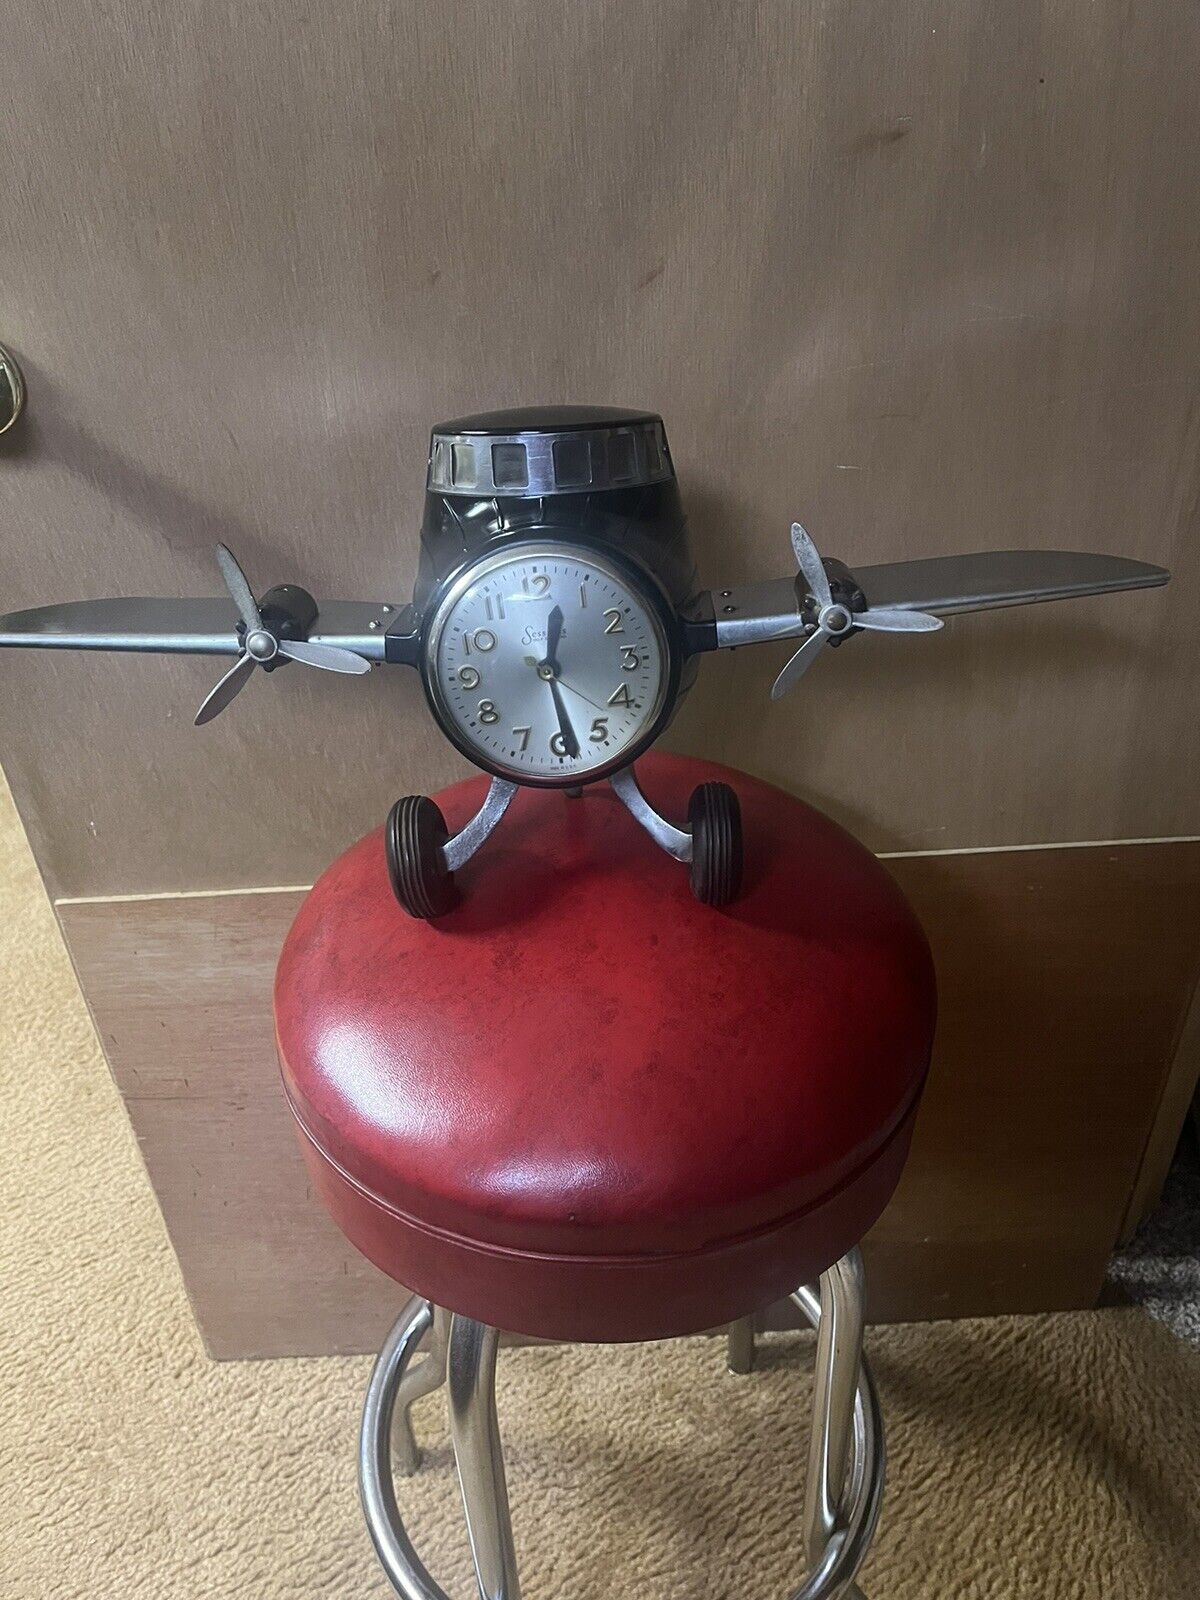 SESSIONS ELECTRIC MANTEL CLOCK VINTAGE AIRPLANE RARE